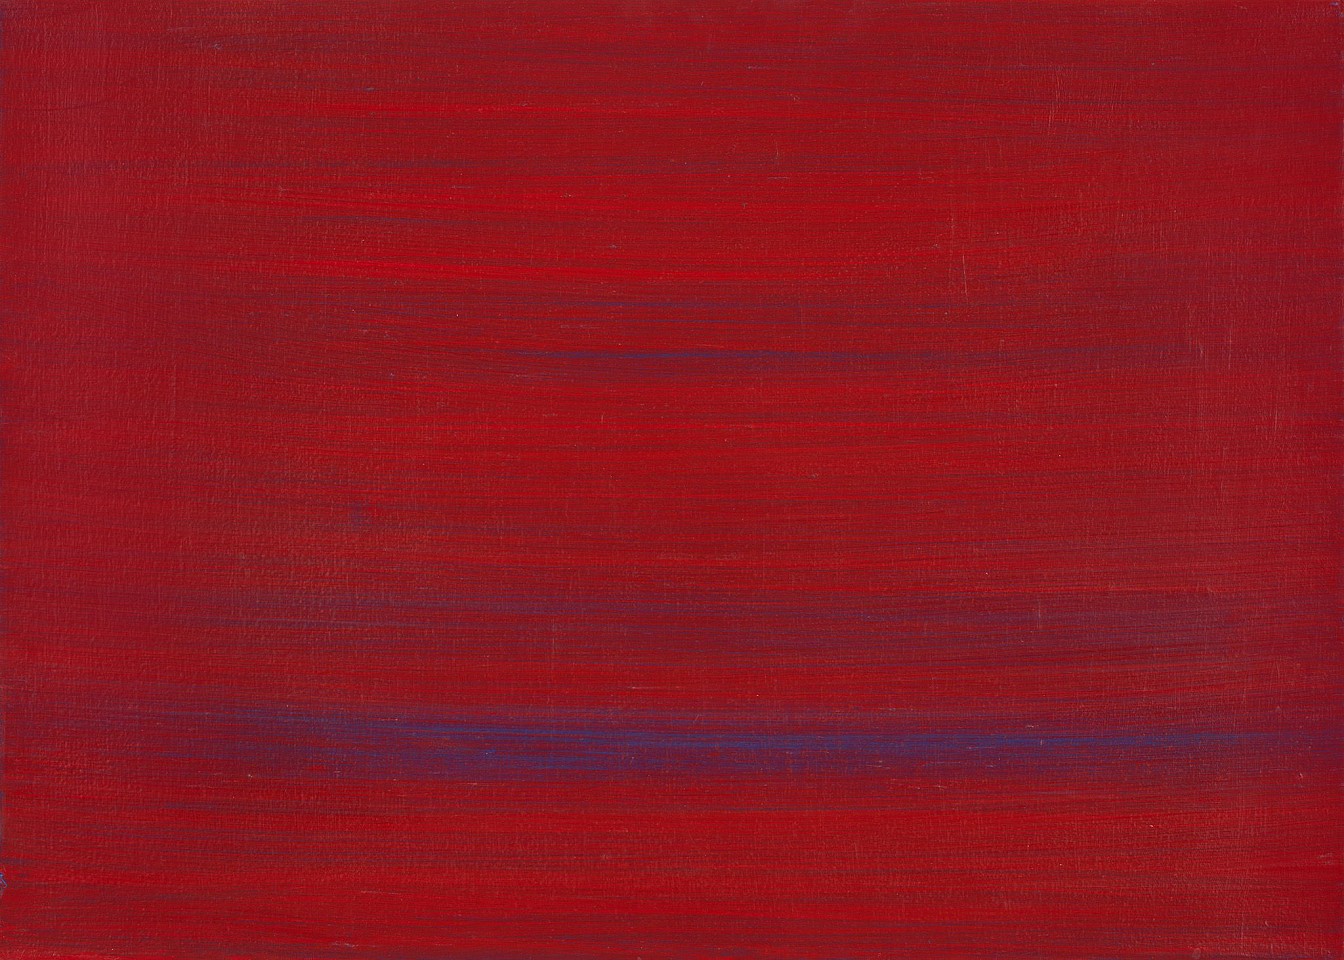 Rochelle Caper, Untitled, 1990 - 2000
Oil on canvas, 20 x 29 in. (50.8 x 73.7 cm)
RCAP-00003